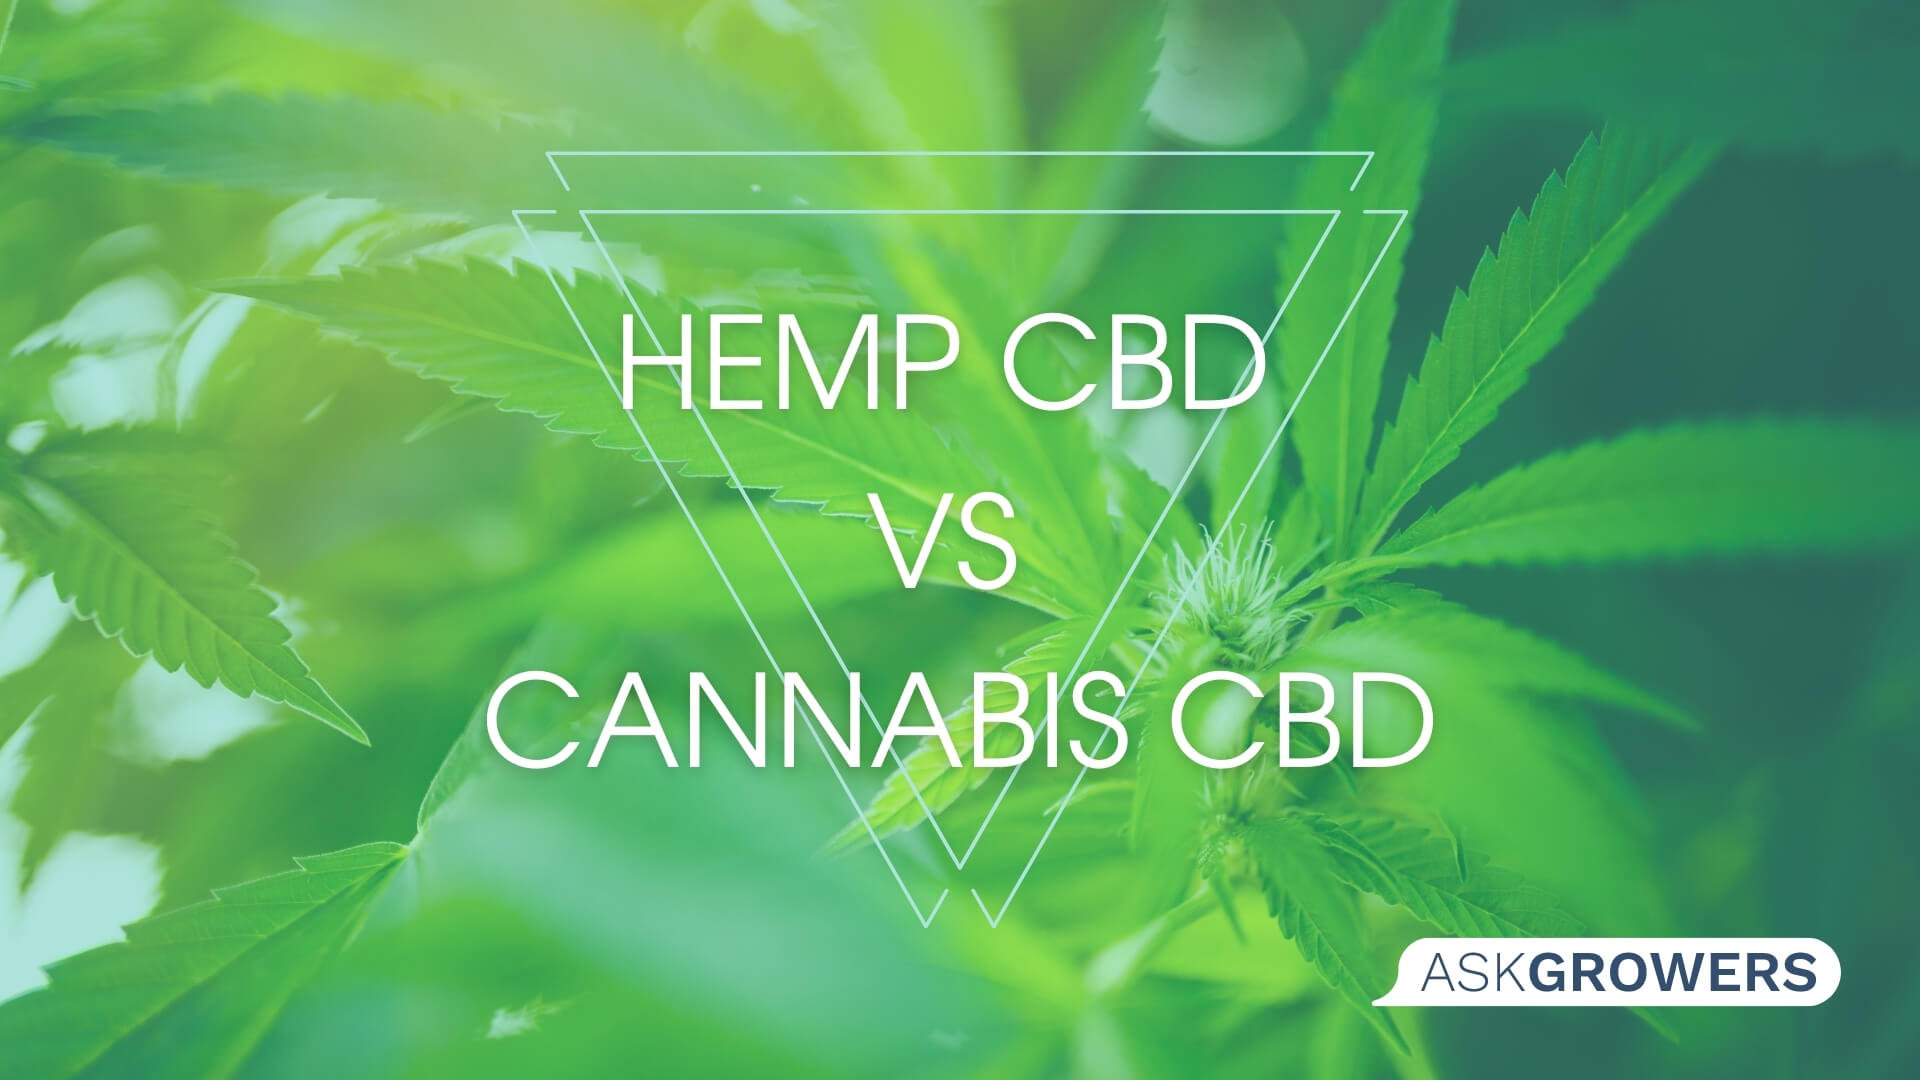 Hemp CBD vs. Cannabis CBD: Is There a Difference, and Which Is Safer?